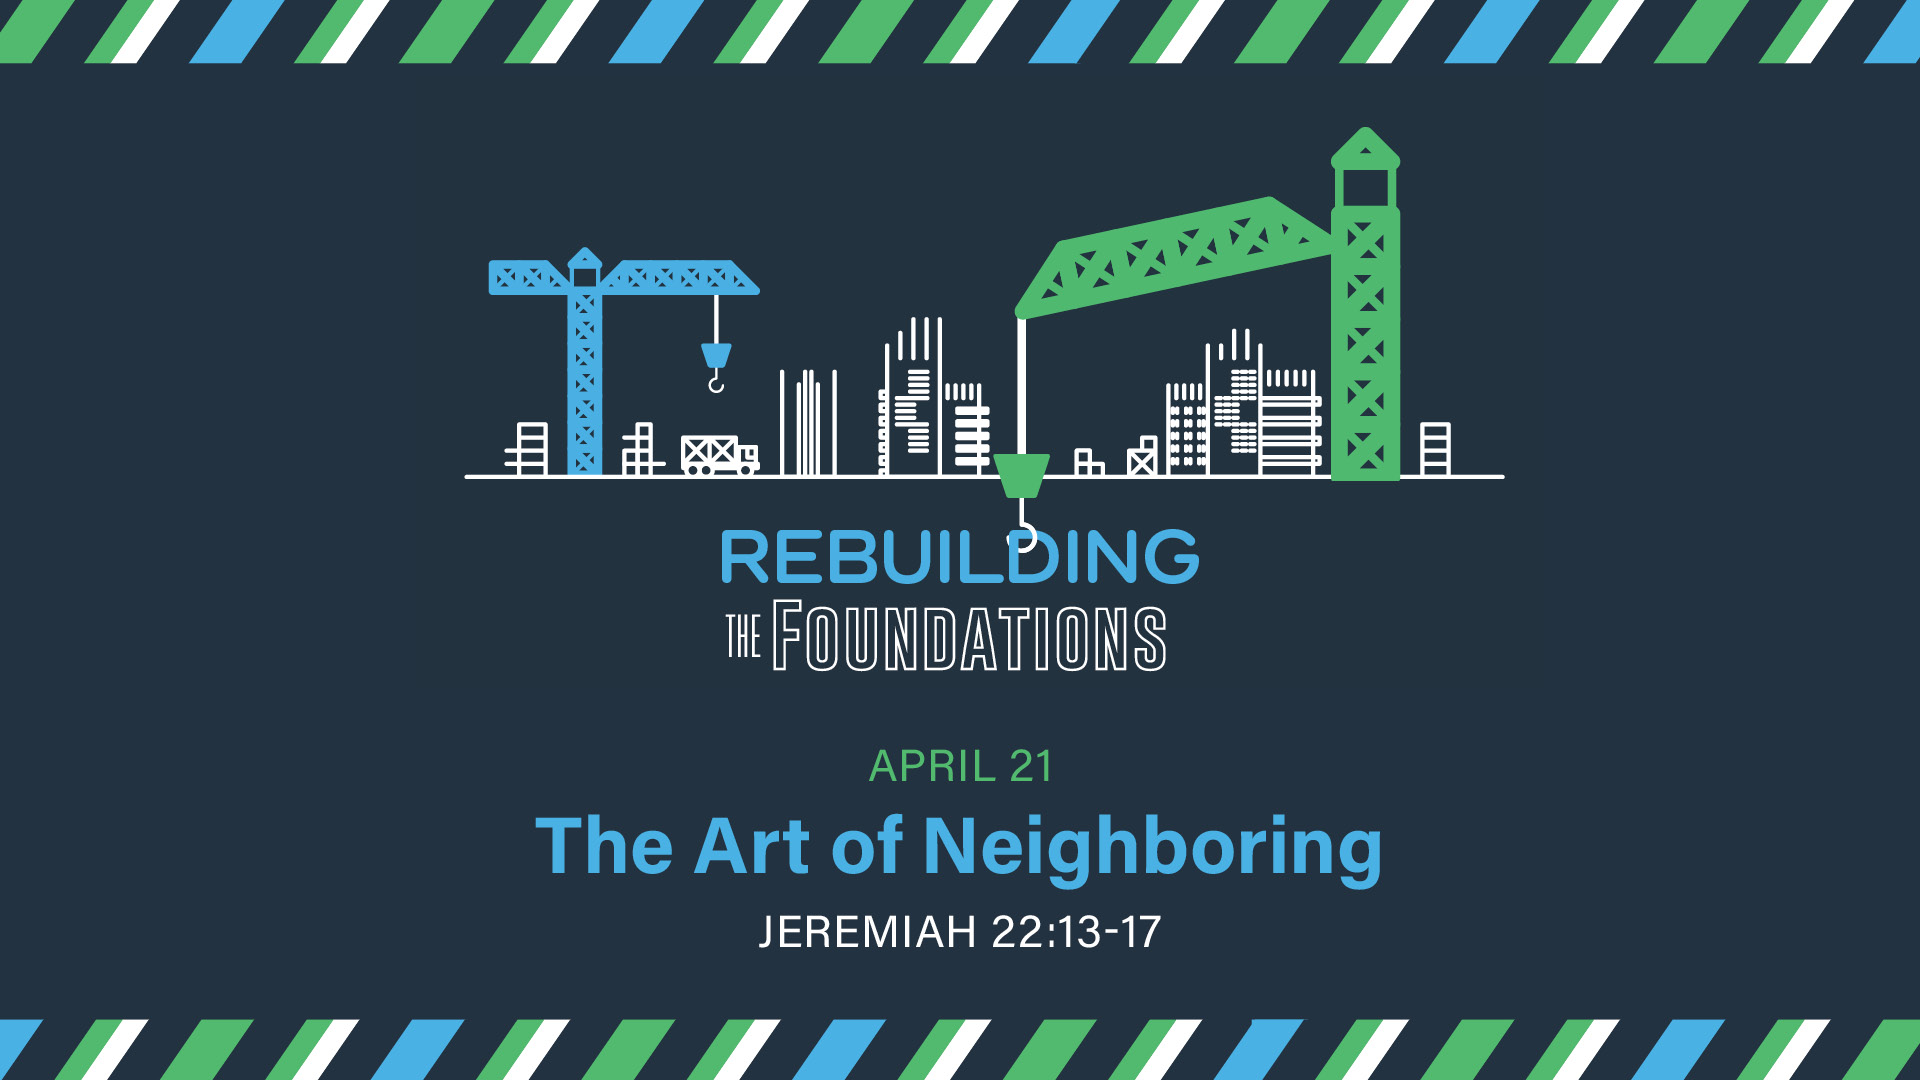 April 21 - Rebuilding the Foundations: The Art of Neighboring